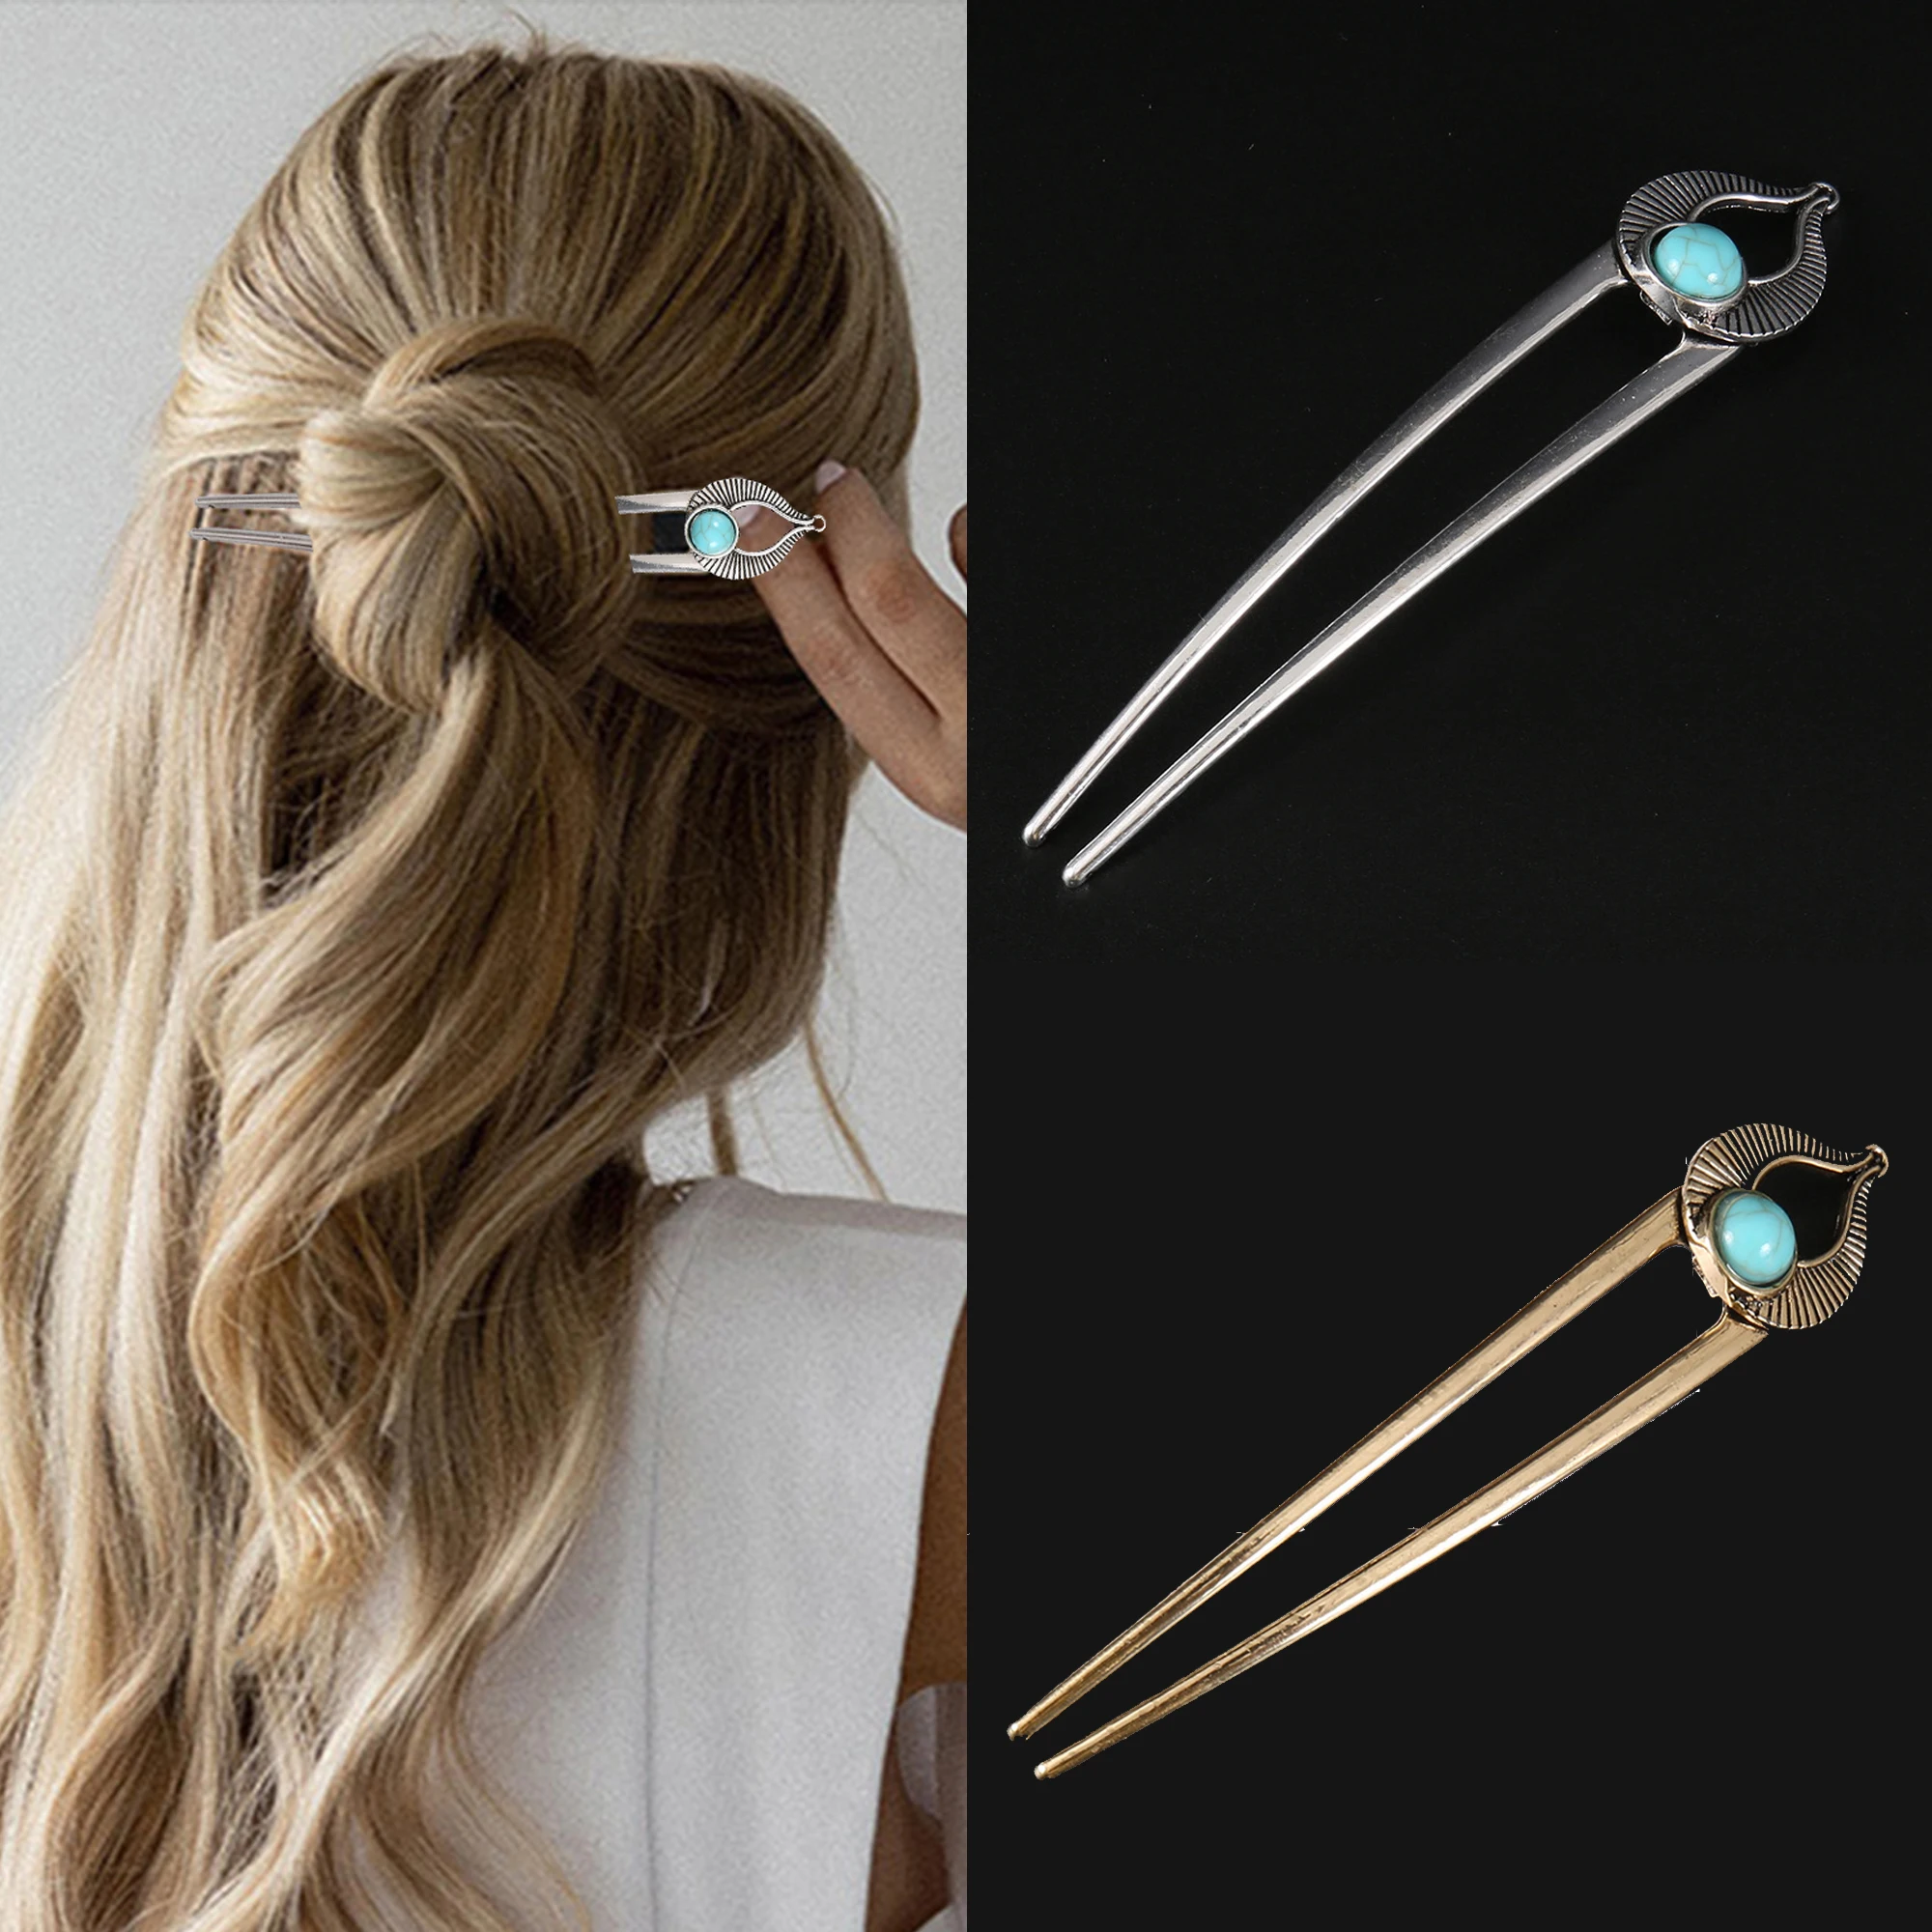 New Luxury Silver Gold Color Turquoise Hairpin for Women Metal U Shape Shell Enamel Hair Stick Hairwear Accessories Jewelry Gift